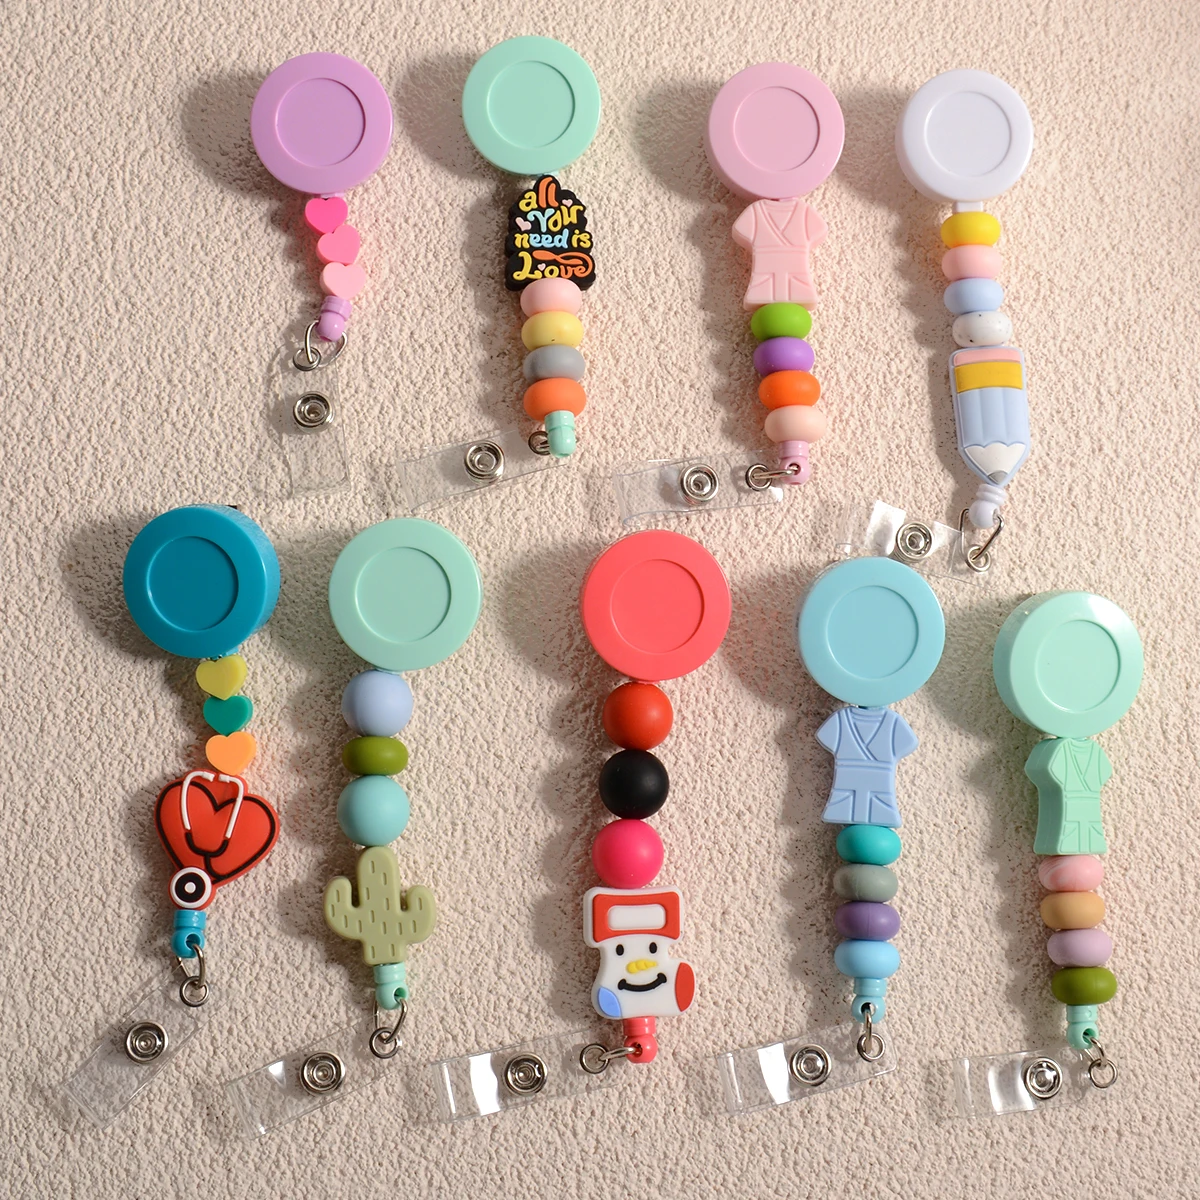 Retractable Silicone Beads Badge Reels BBS Cute Heart Nurse Id Badge Holders with Alligator CliP for Nursing Teachers Office retractable silicone beads badge reels bbs cute heart nurse id badge holders with alligator clip for nursing teachers office